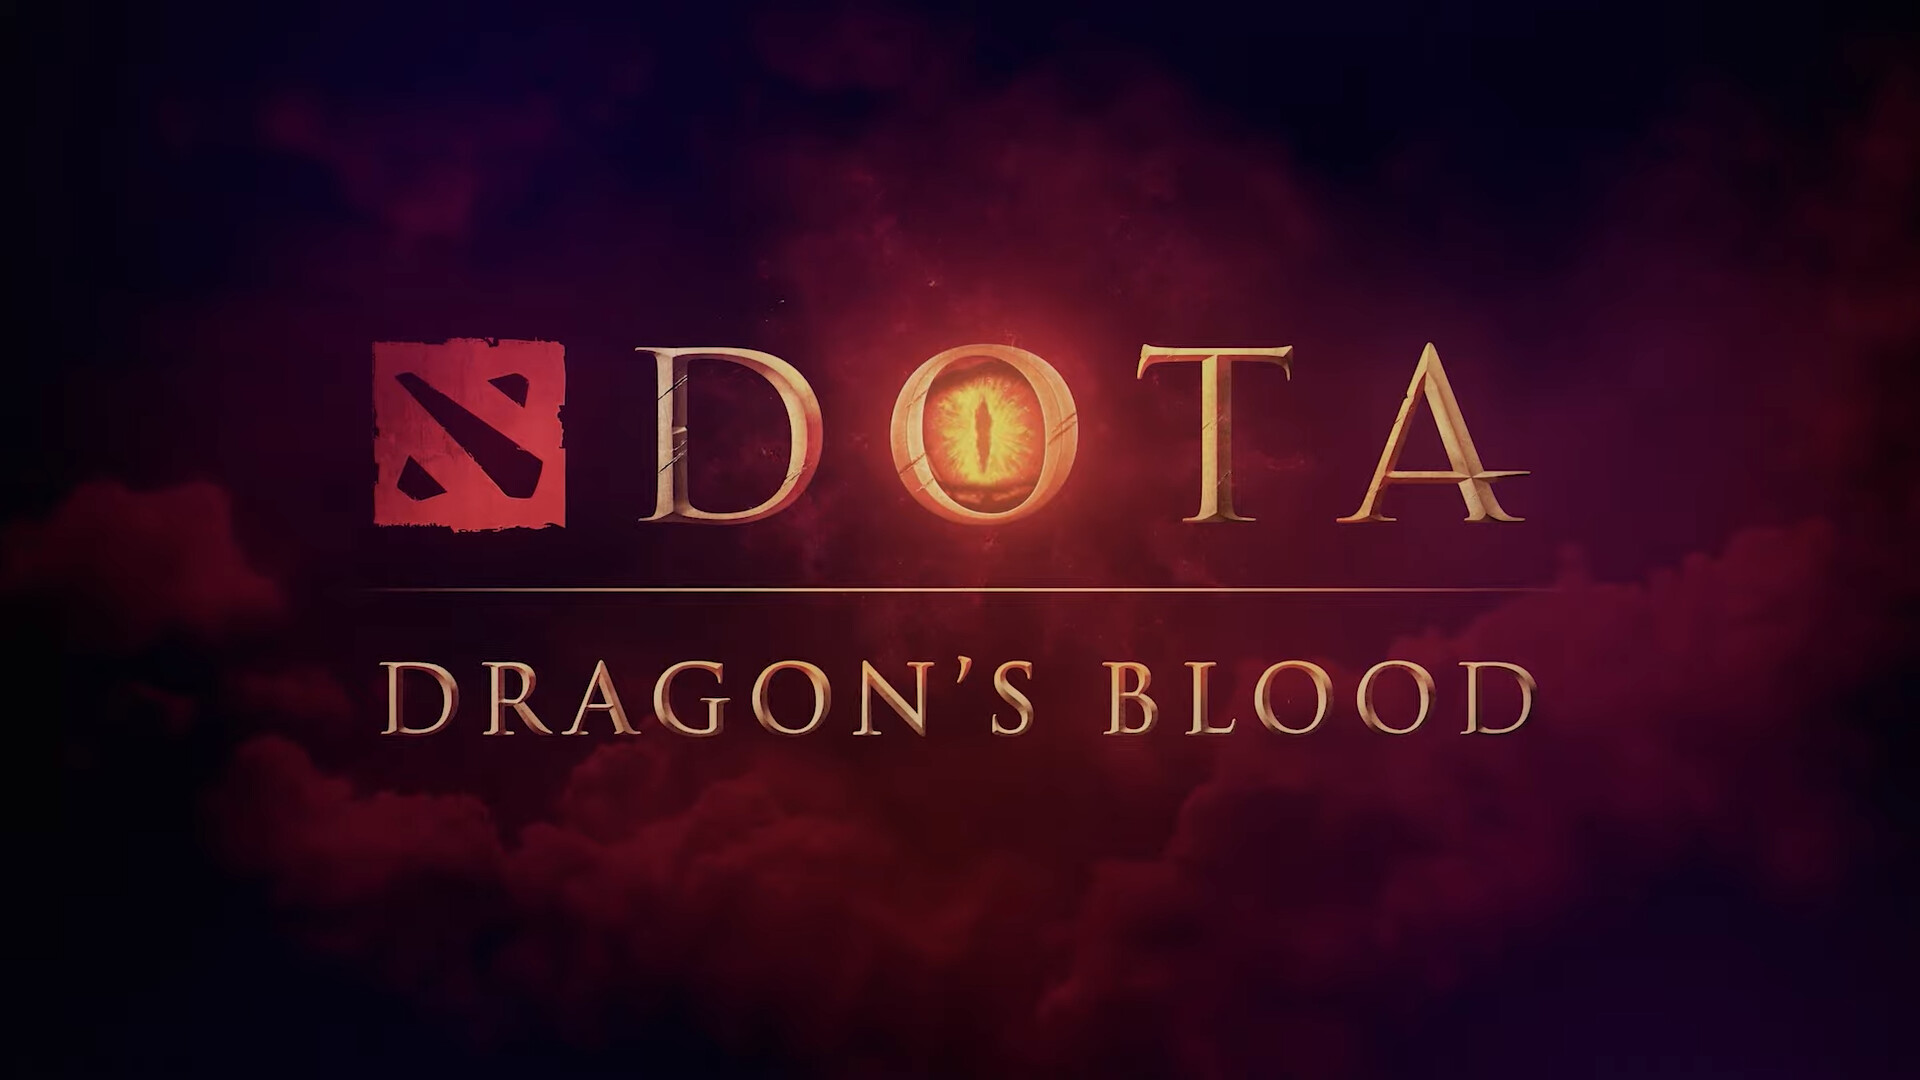 Dota: Dragon's Blood: Netflix series, based on Defense of the Ancients 2, a 2013 video game by Valve. 1920x1080 Full HD Wallpaper.